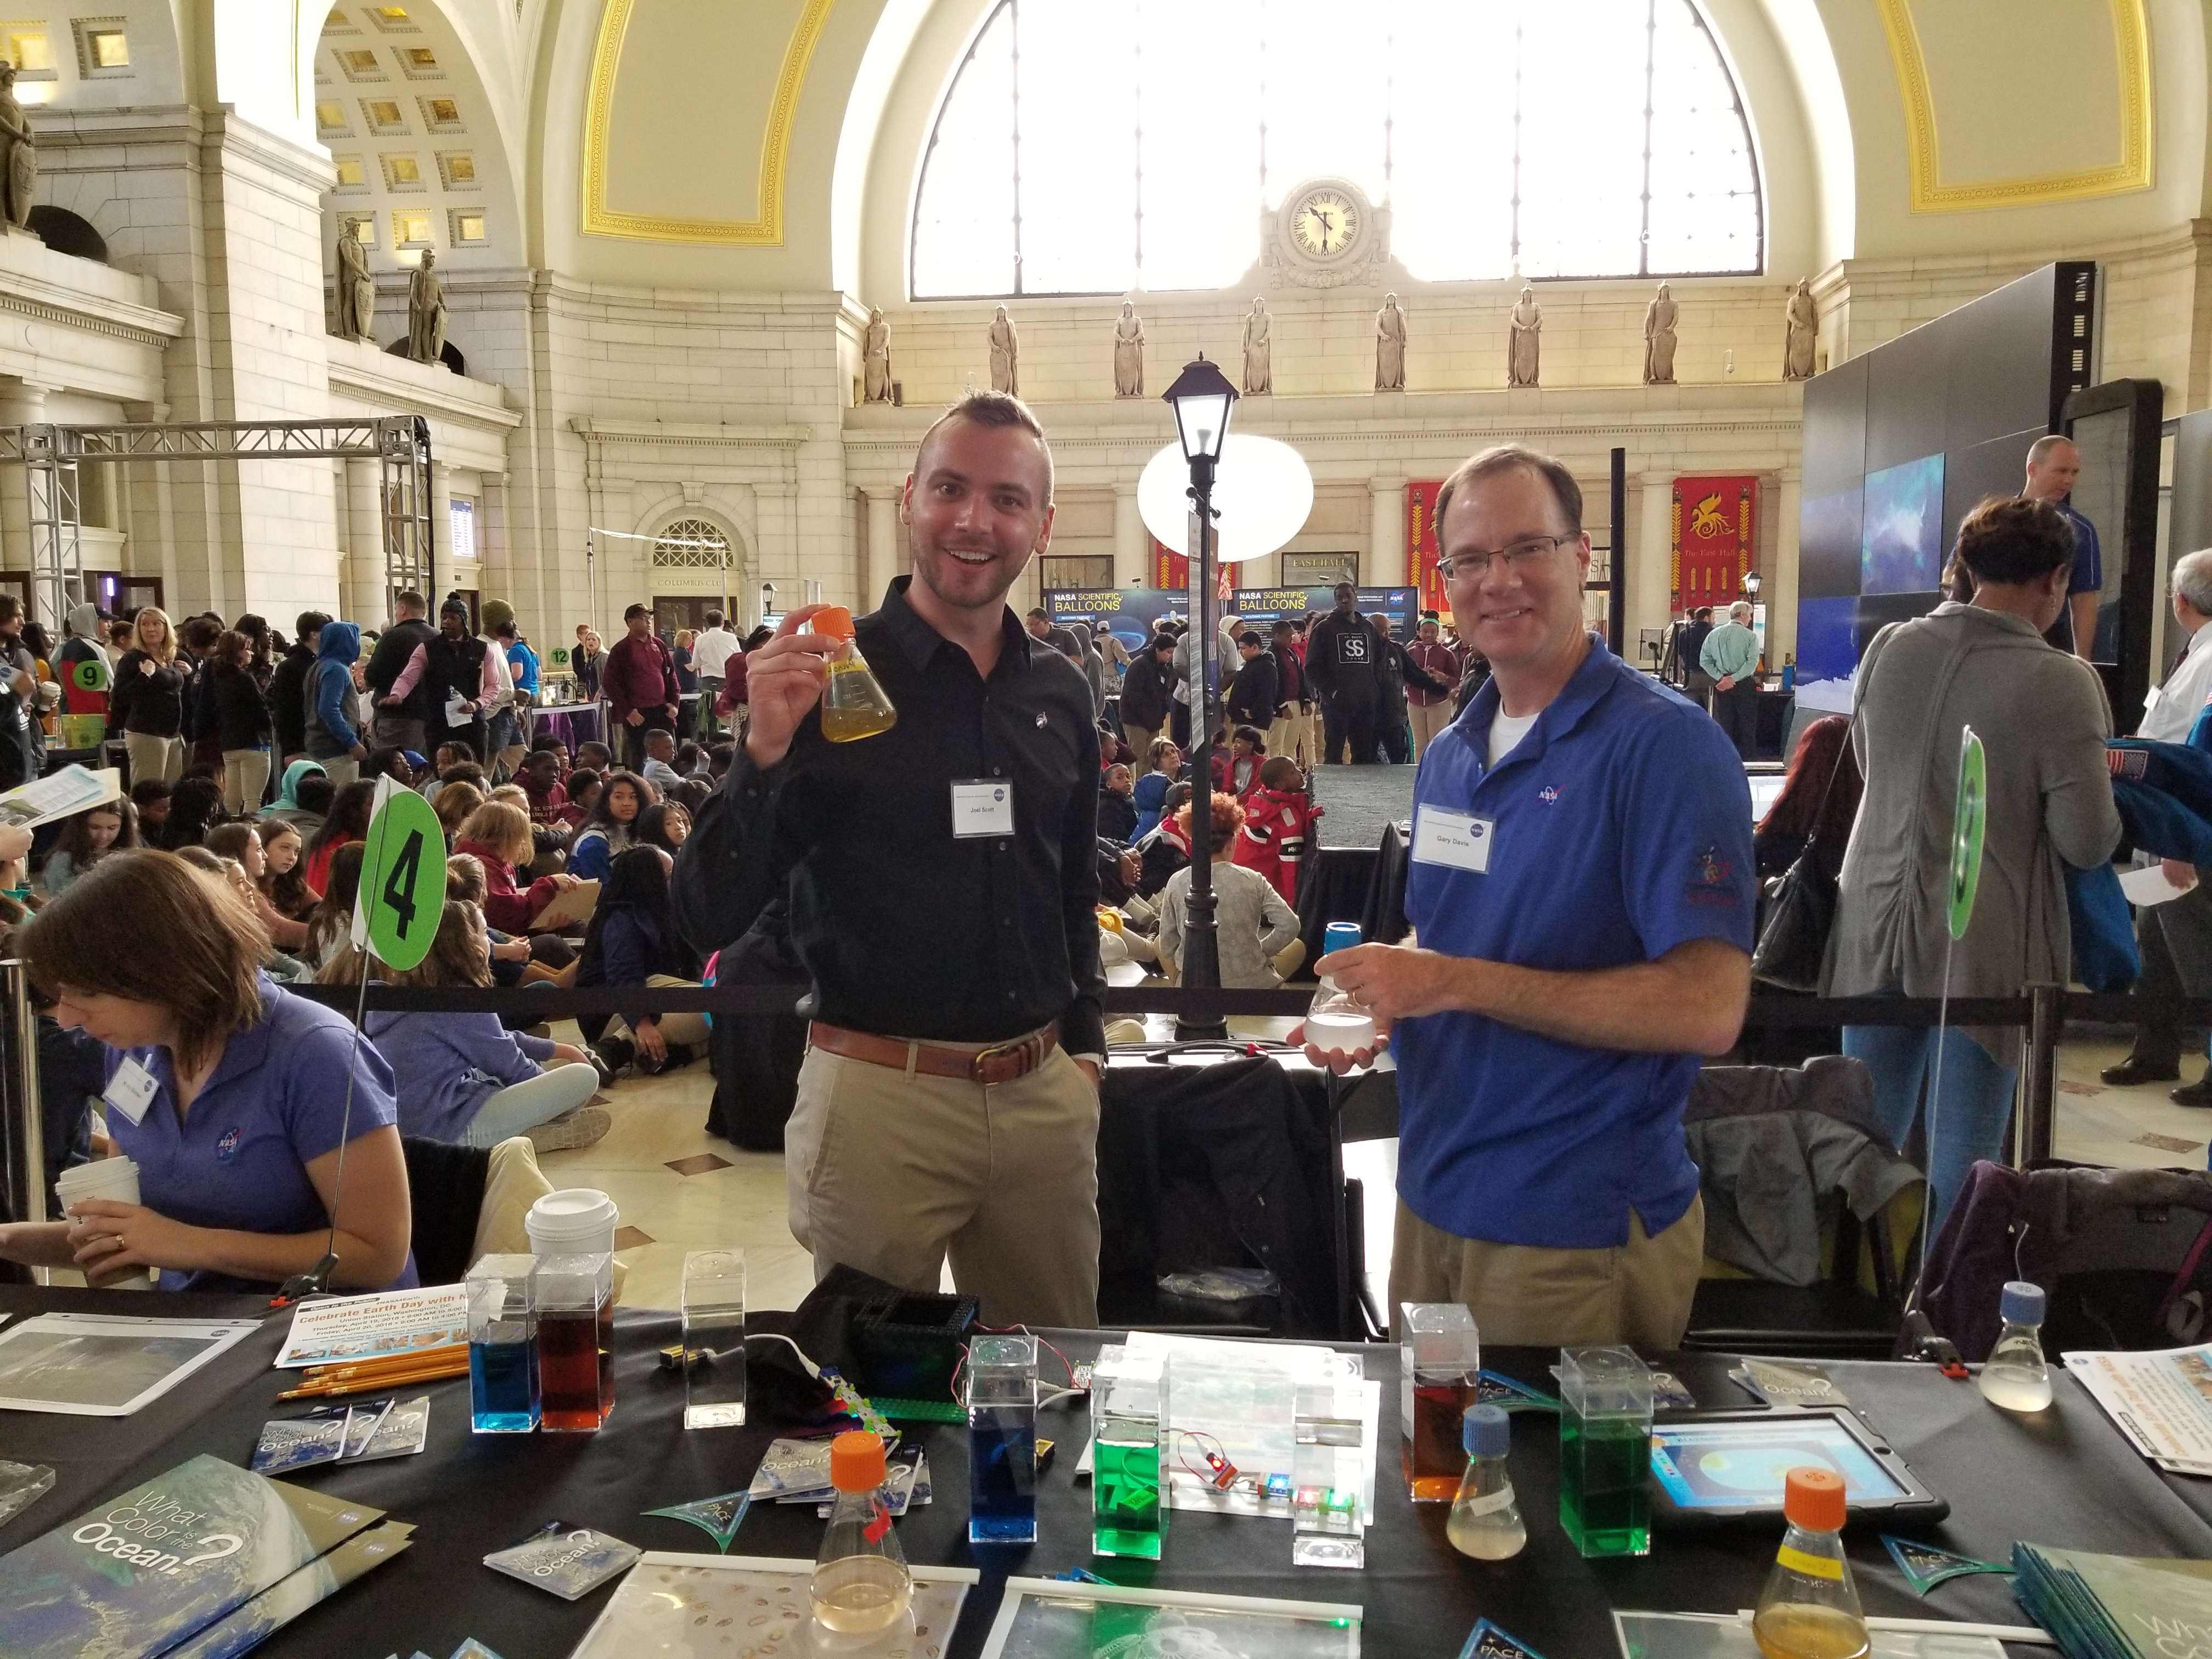 Joel Scott, scientific programmer (left), and Gary Davis, spacecraft systems engineer (right), showcase cultures of phytoplankton for NASA Earth Day Celebration at Union Station in Washington D.C.